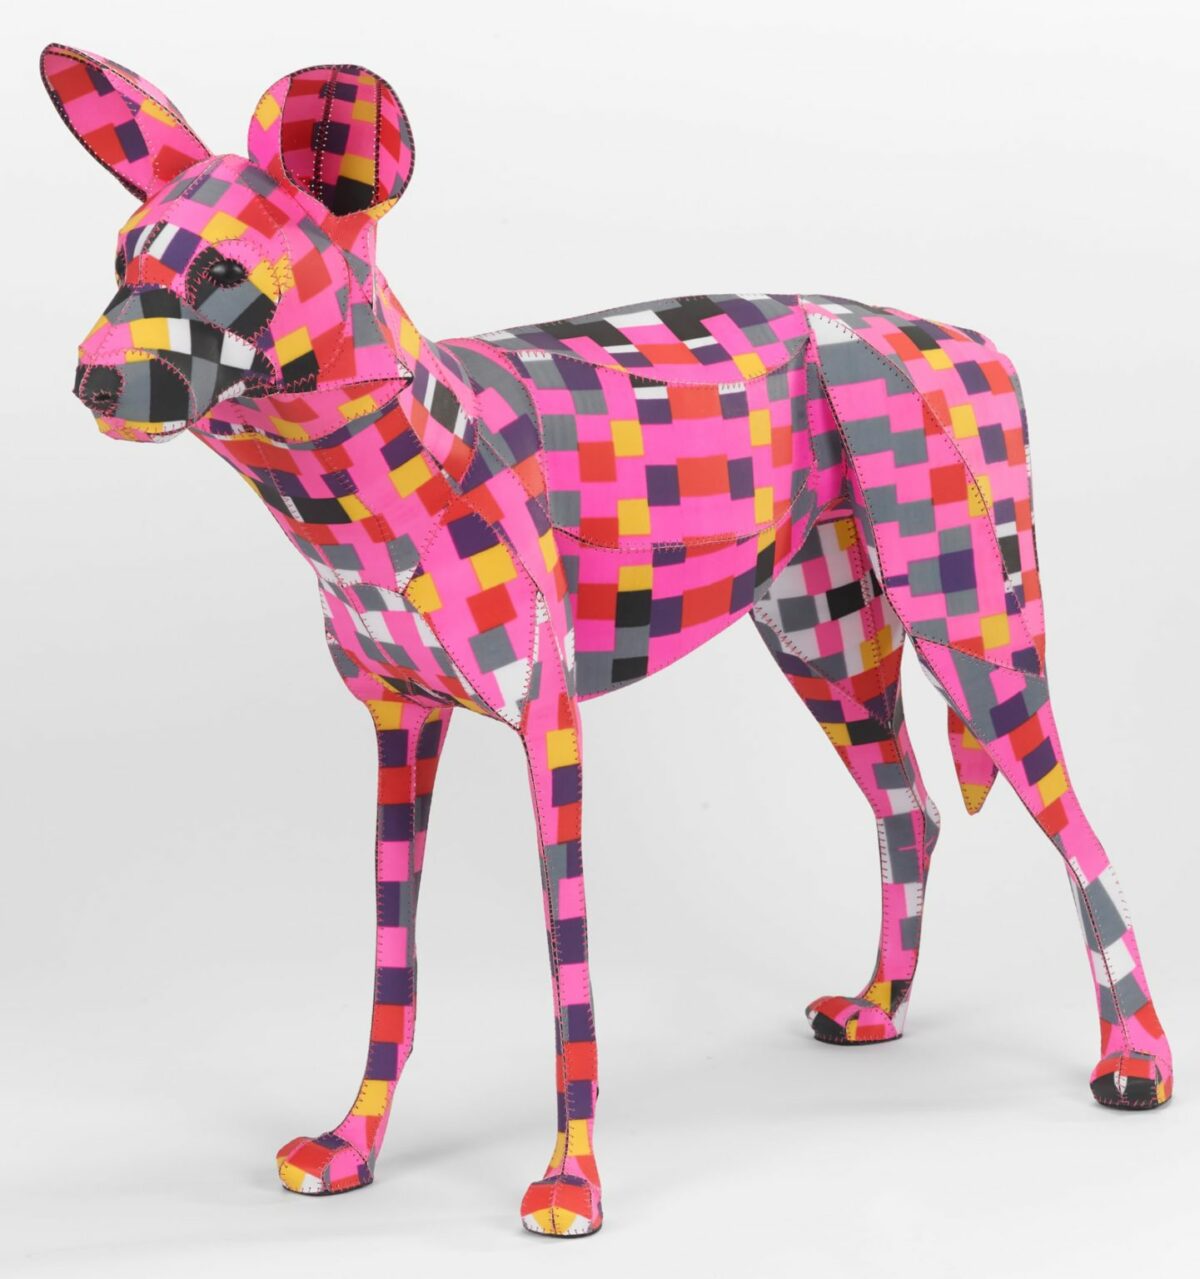 Stunning Three Dimensional Animal Paper Sculptures Decorated With Colorful Patterns By Anne Lemanski (10)